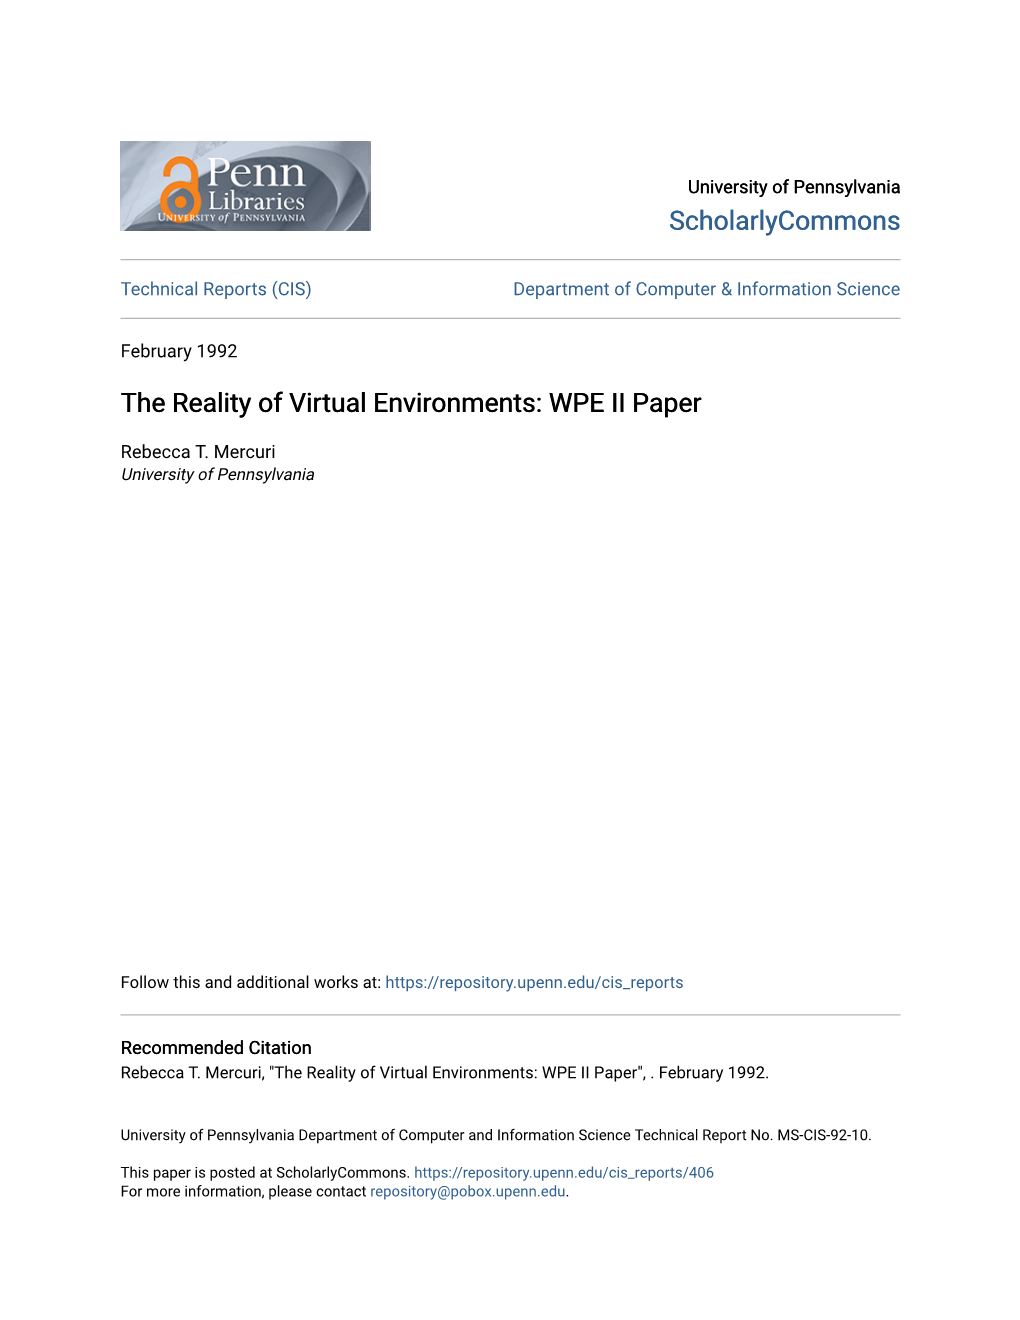 The Reality of Virtual Environments: WPE II Paper